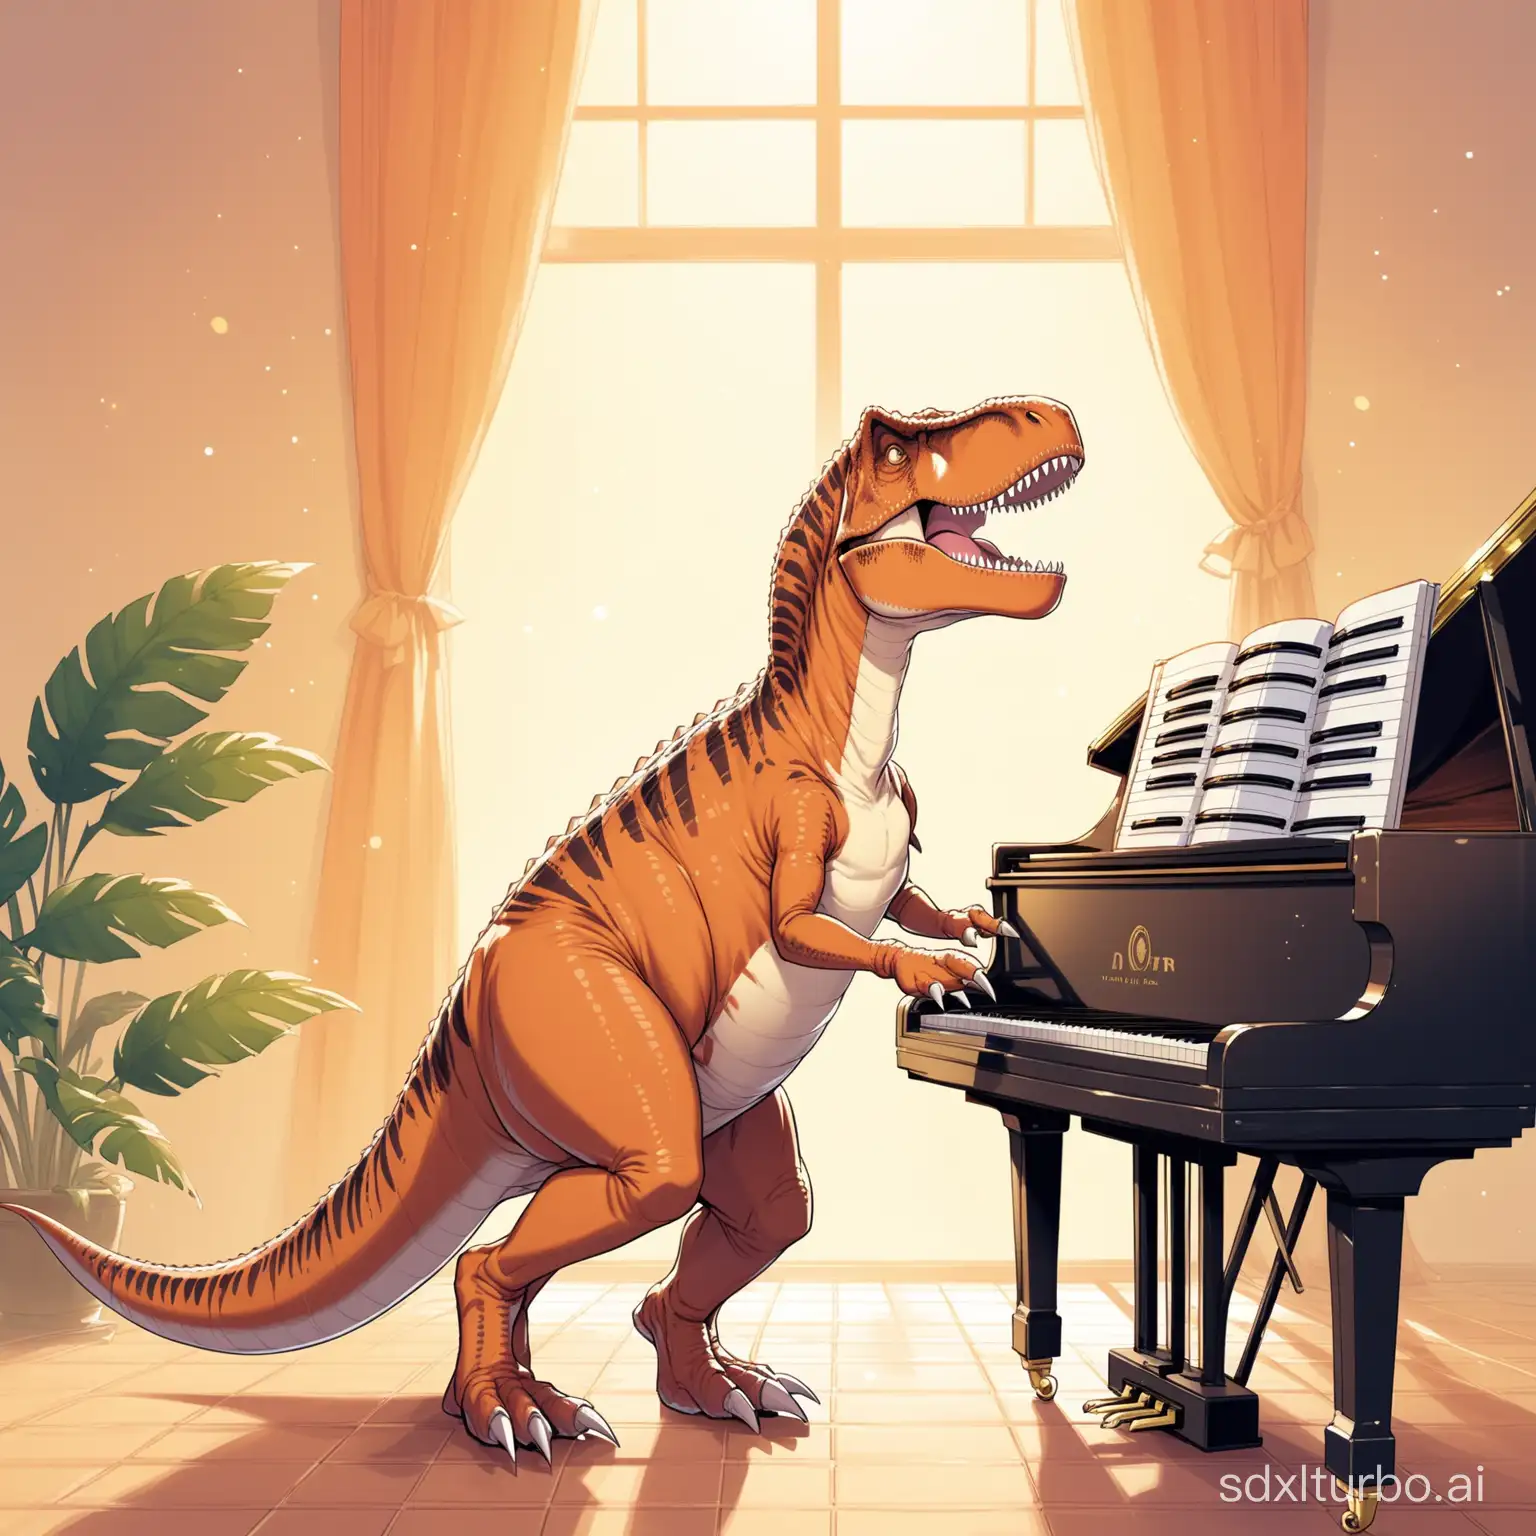 TRex-Dinosaur-Playing-Piano-Quirky-Musical-Scene-with-Prehistoric-Charm